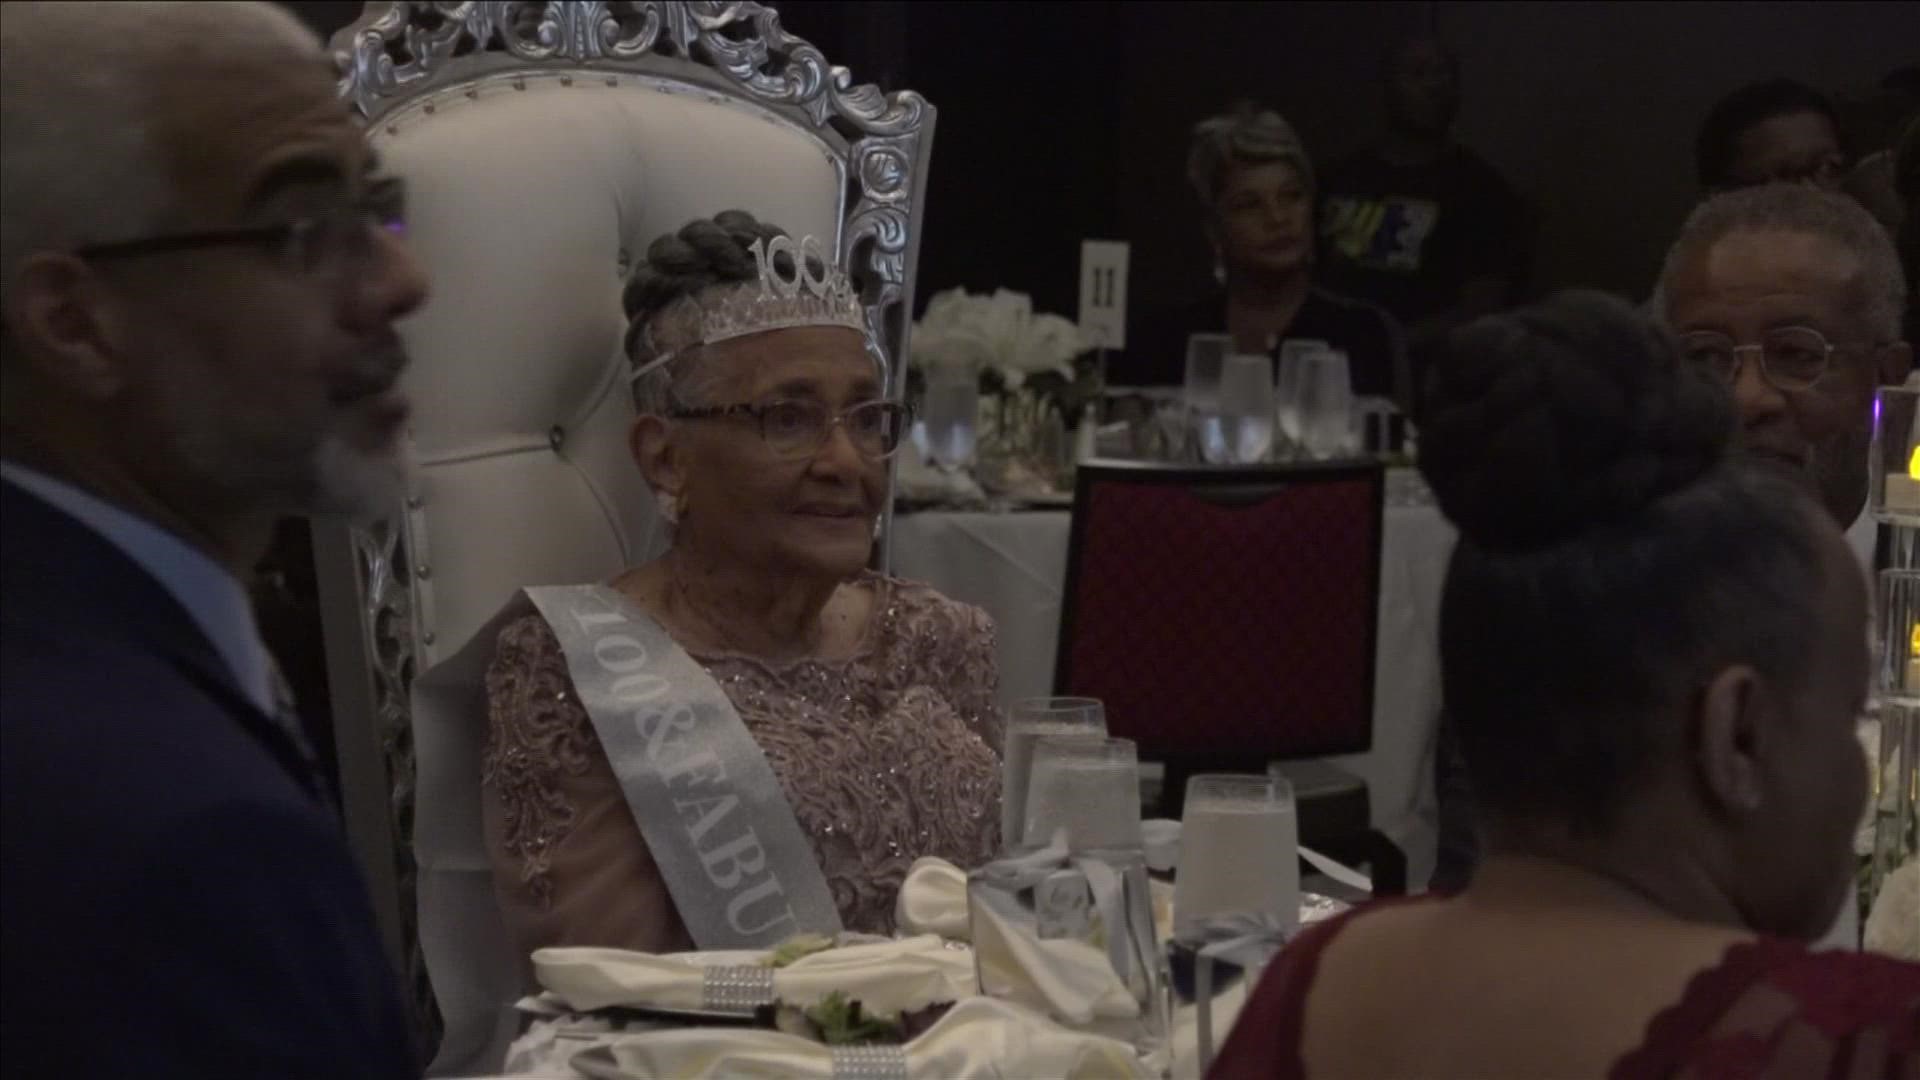 "Mother Tate" was born in Alabama but has made Memphis her home in recent years. On Sept. 23, she turns 100-years-old, but her family couldn't wait to celebrate.